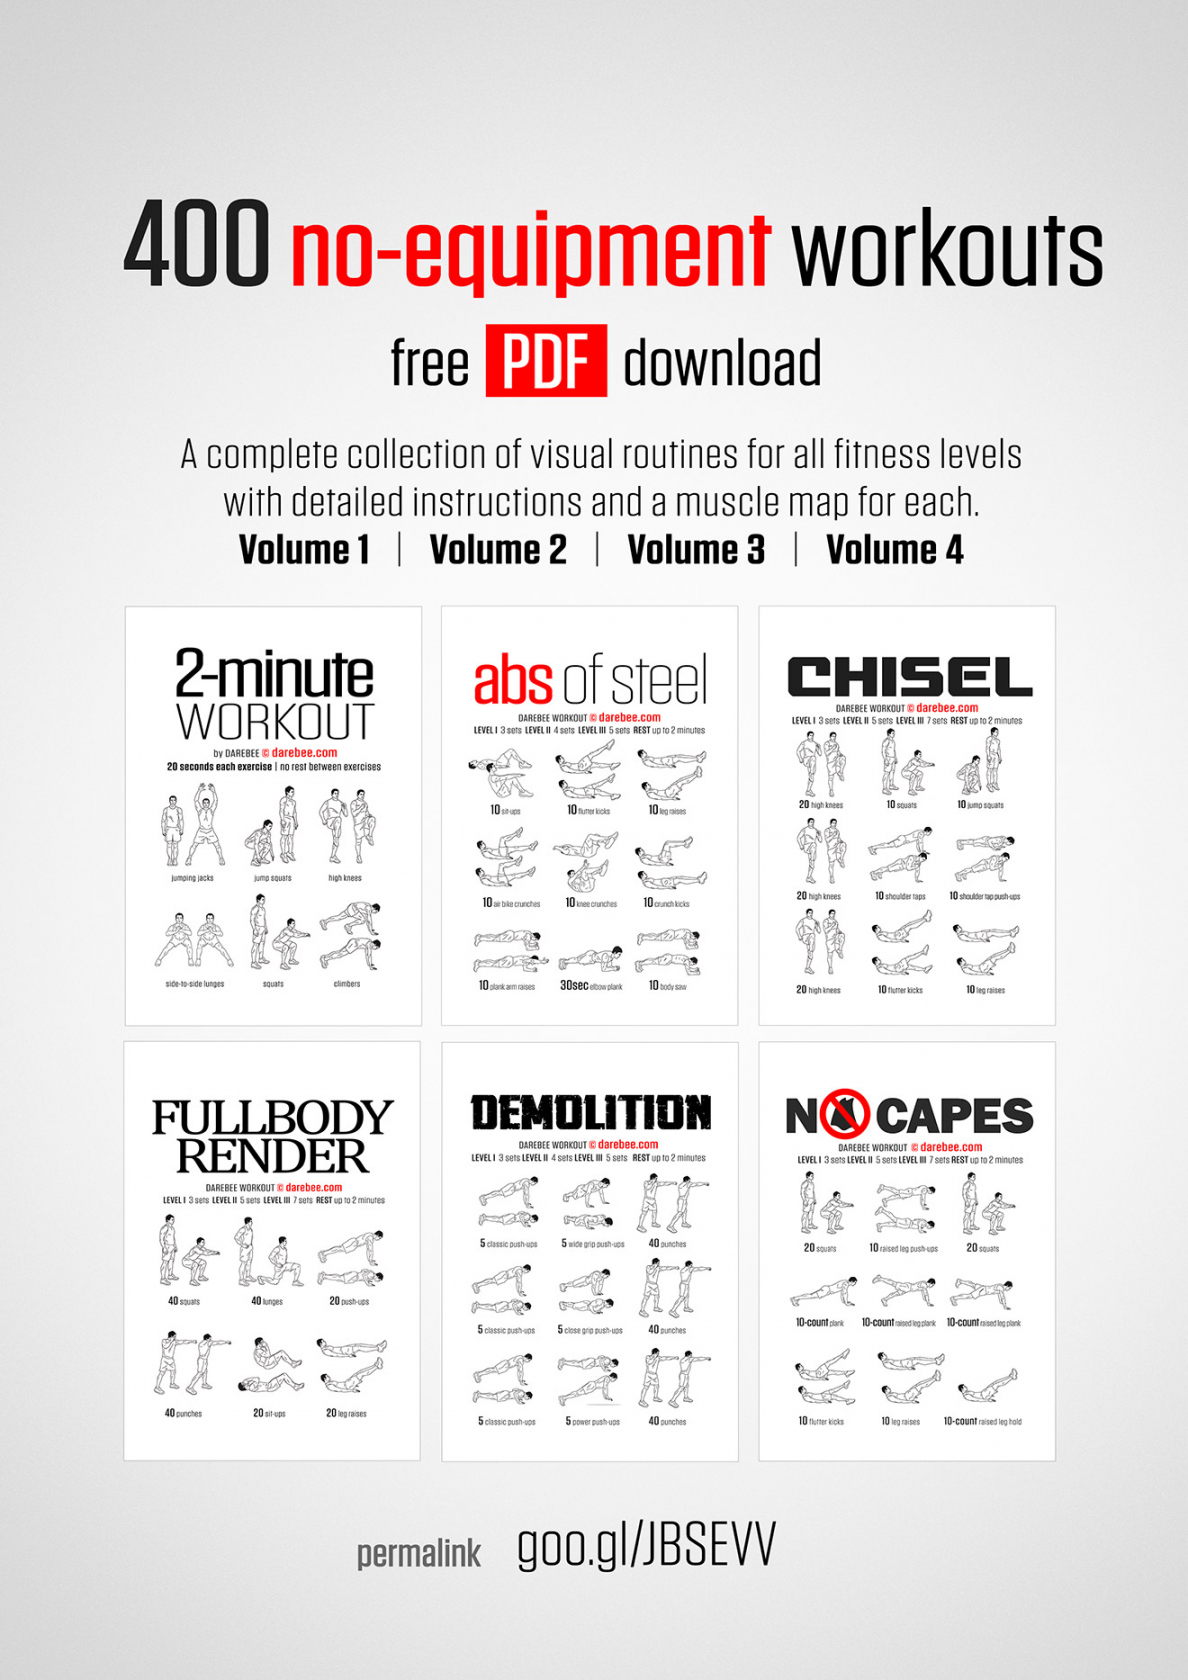 No-Equipment Workout Collections